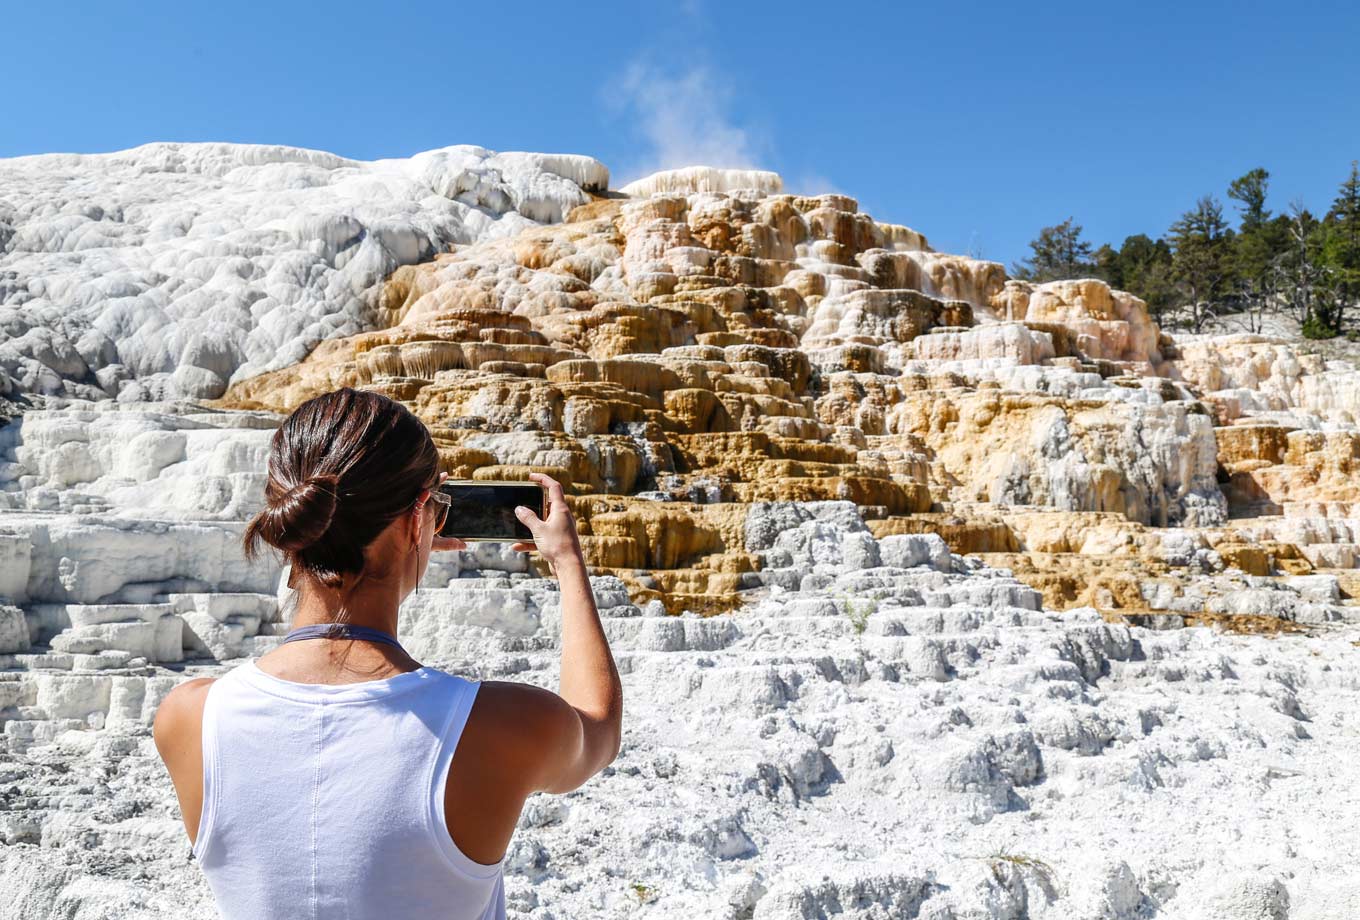 A Yellowstone visitor photographing Mammoth Hot Springs